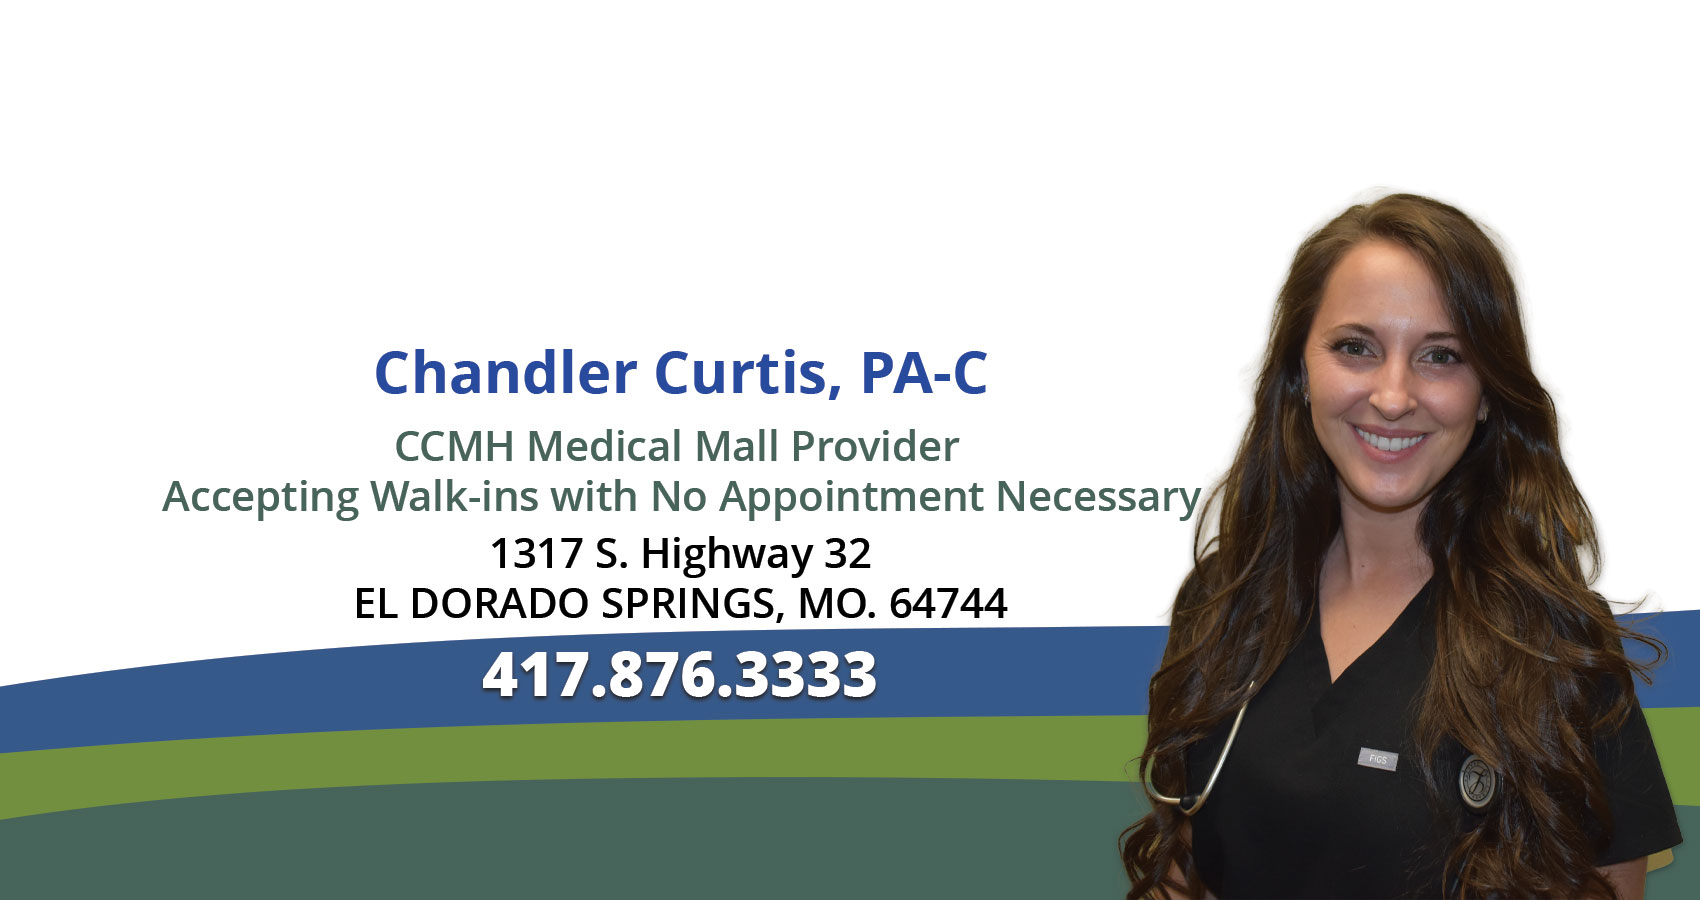 Banner picture of smiling Chandler Curtis, PA-C , sitting at a desk with a pen in her hand touching some paper work. Banner says:

Welcome, CHANDLER CURTIS, PA-C 

Cedar County Memorial Hospital is pleased to announce that Chandler Curtis, PA-C Joining our Medical Mall provider team. She will be joining Andrew Wyant, M.D and Craig Wamsley, M.D. at our1317 S. Hwy 32 location.